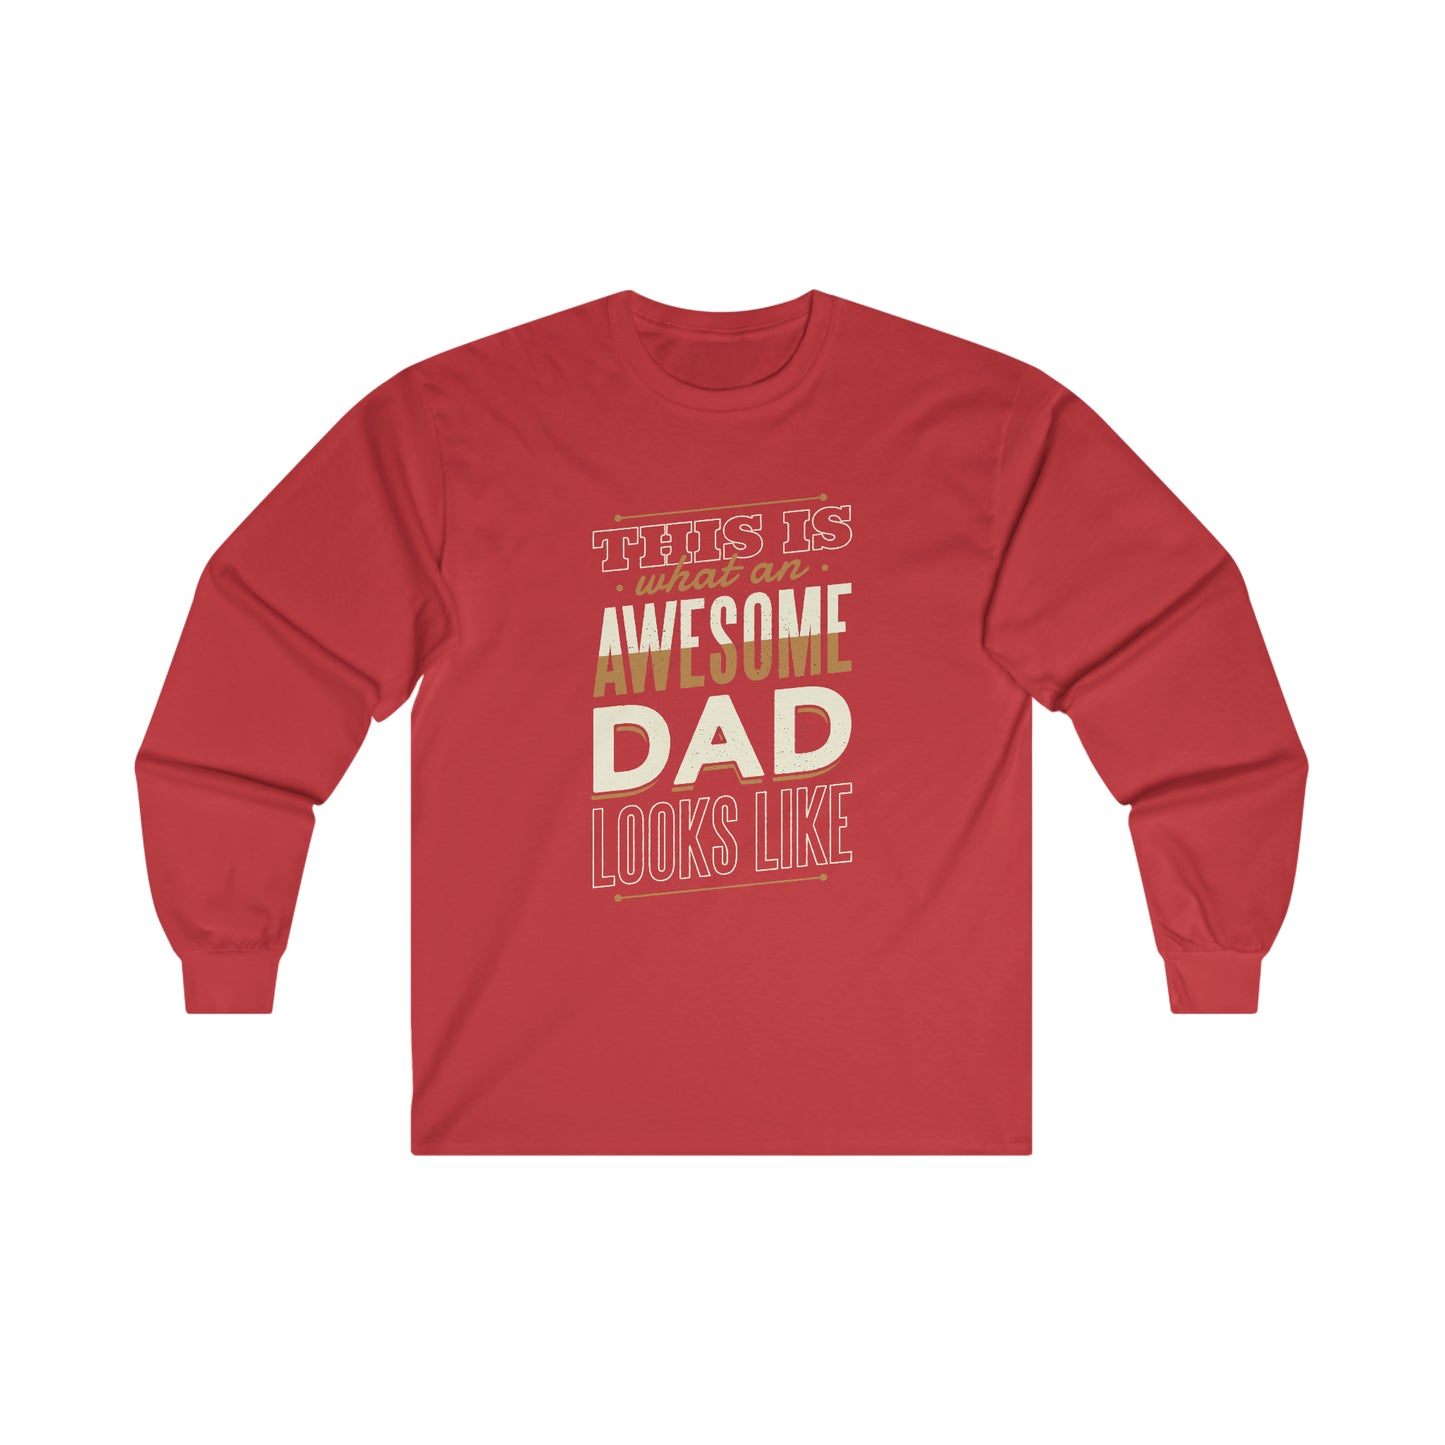 Awesome Dad Ultra Cotton Long Sleeve Tee